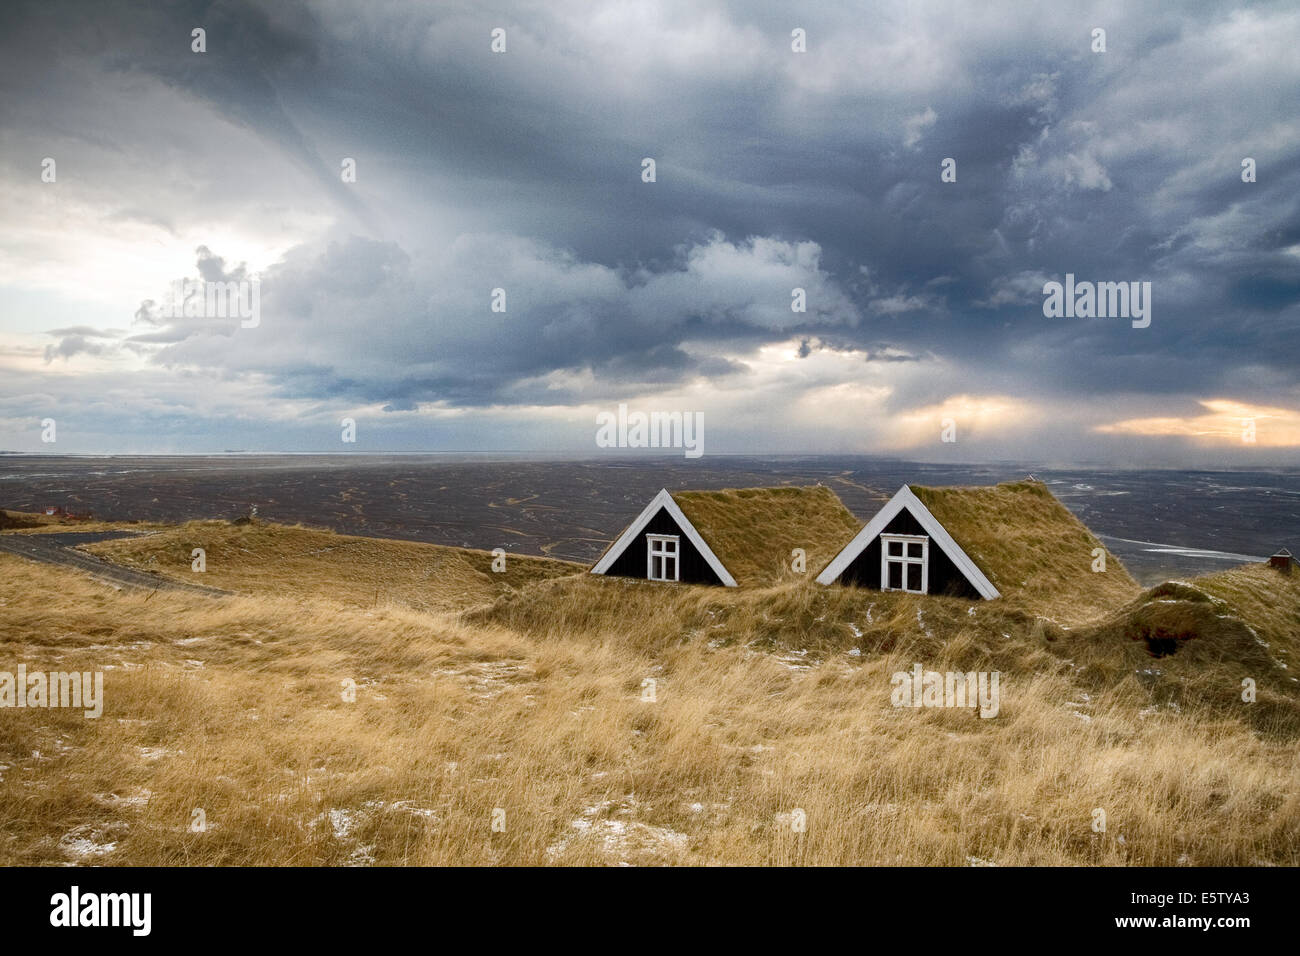 Iceland typical turf houses Stock Photo